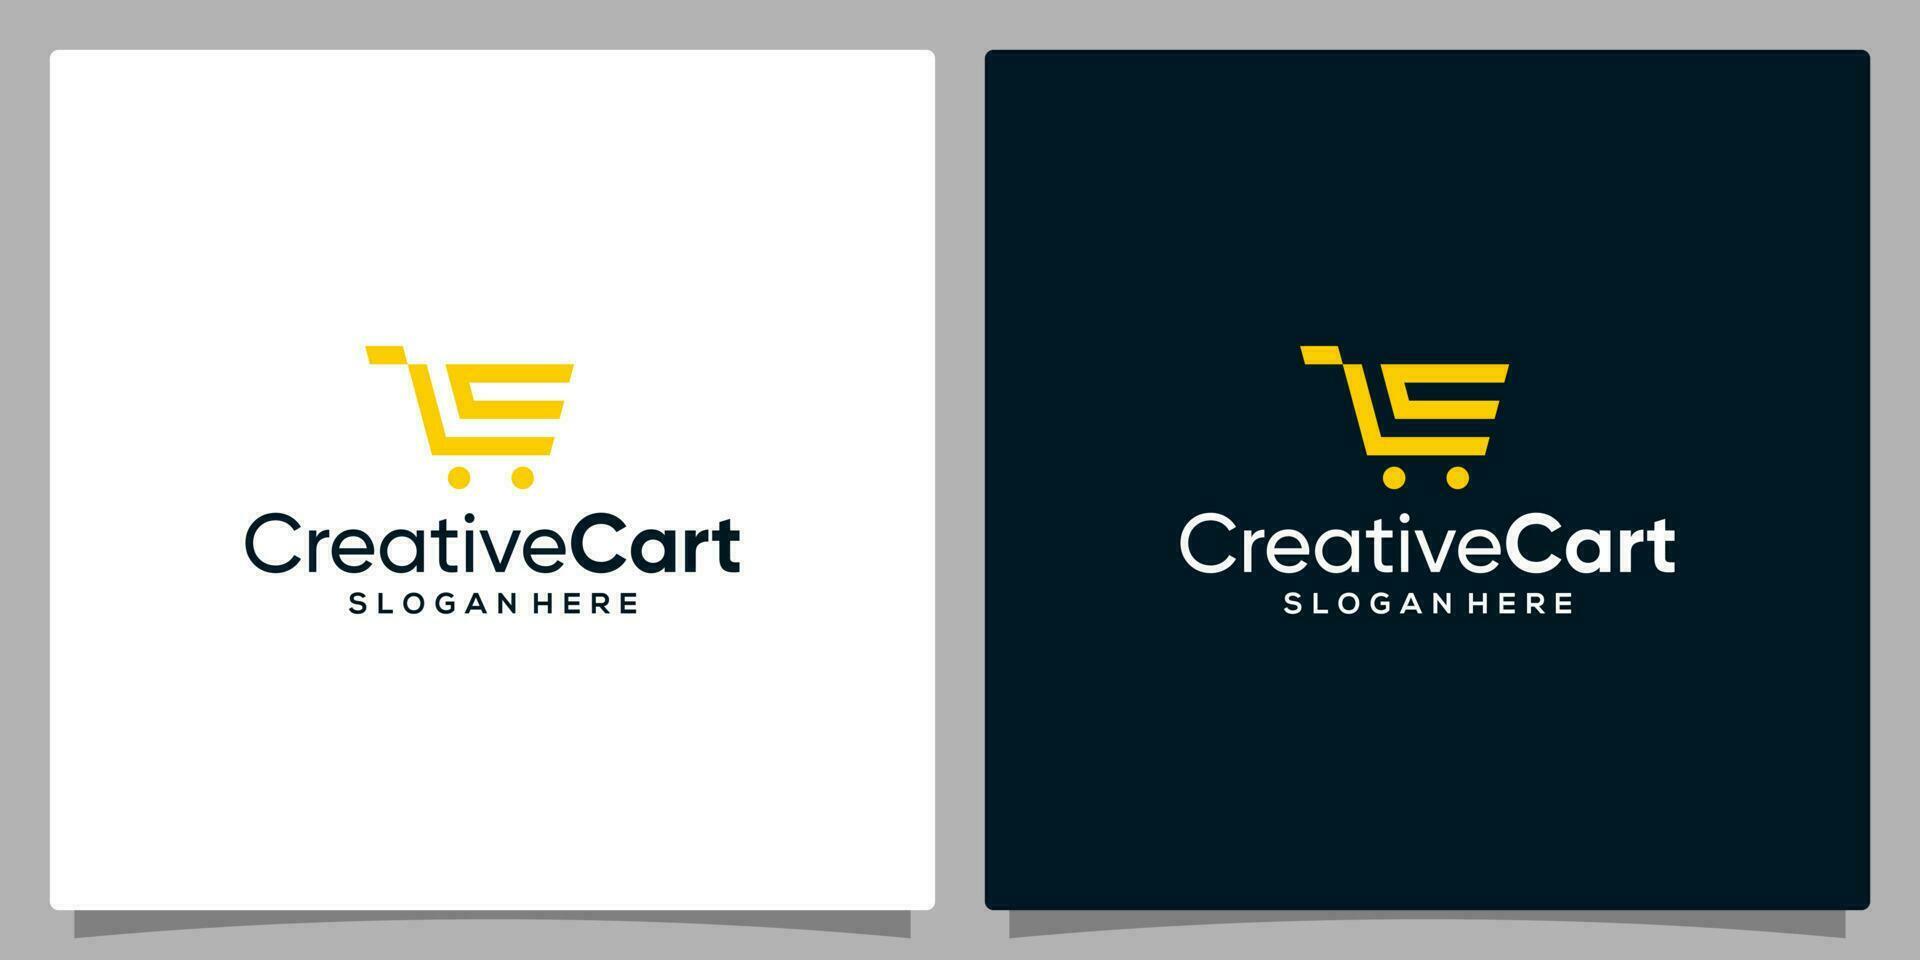 Template design icon logo vector shopping cart with symbol initial letter C. Premium vector